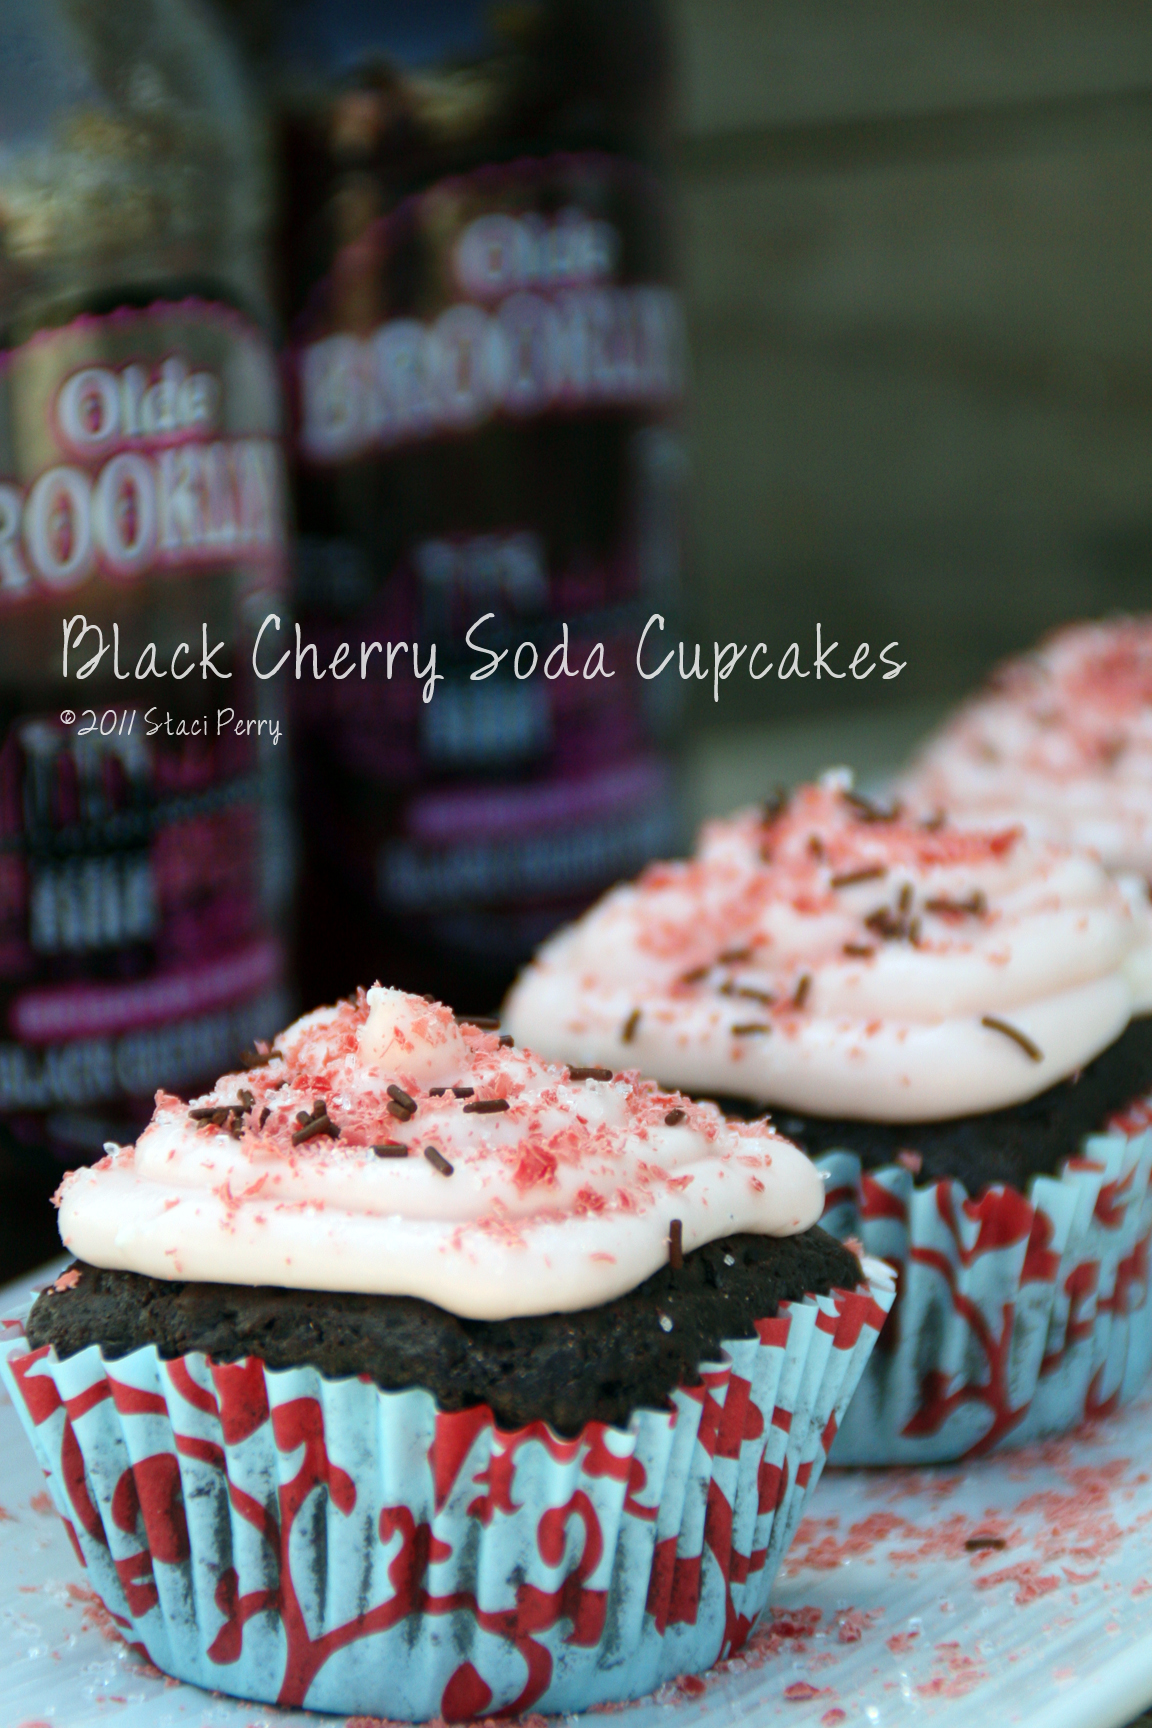 Black Cherry Soda Cupcakes for a Summer Treat